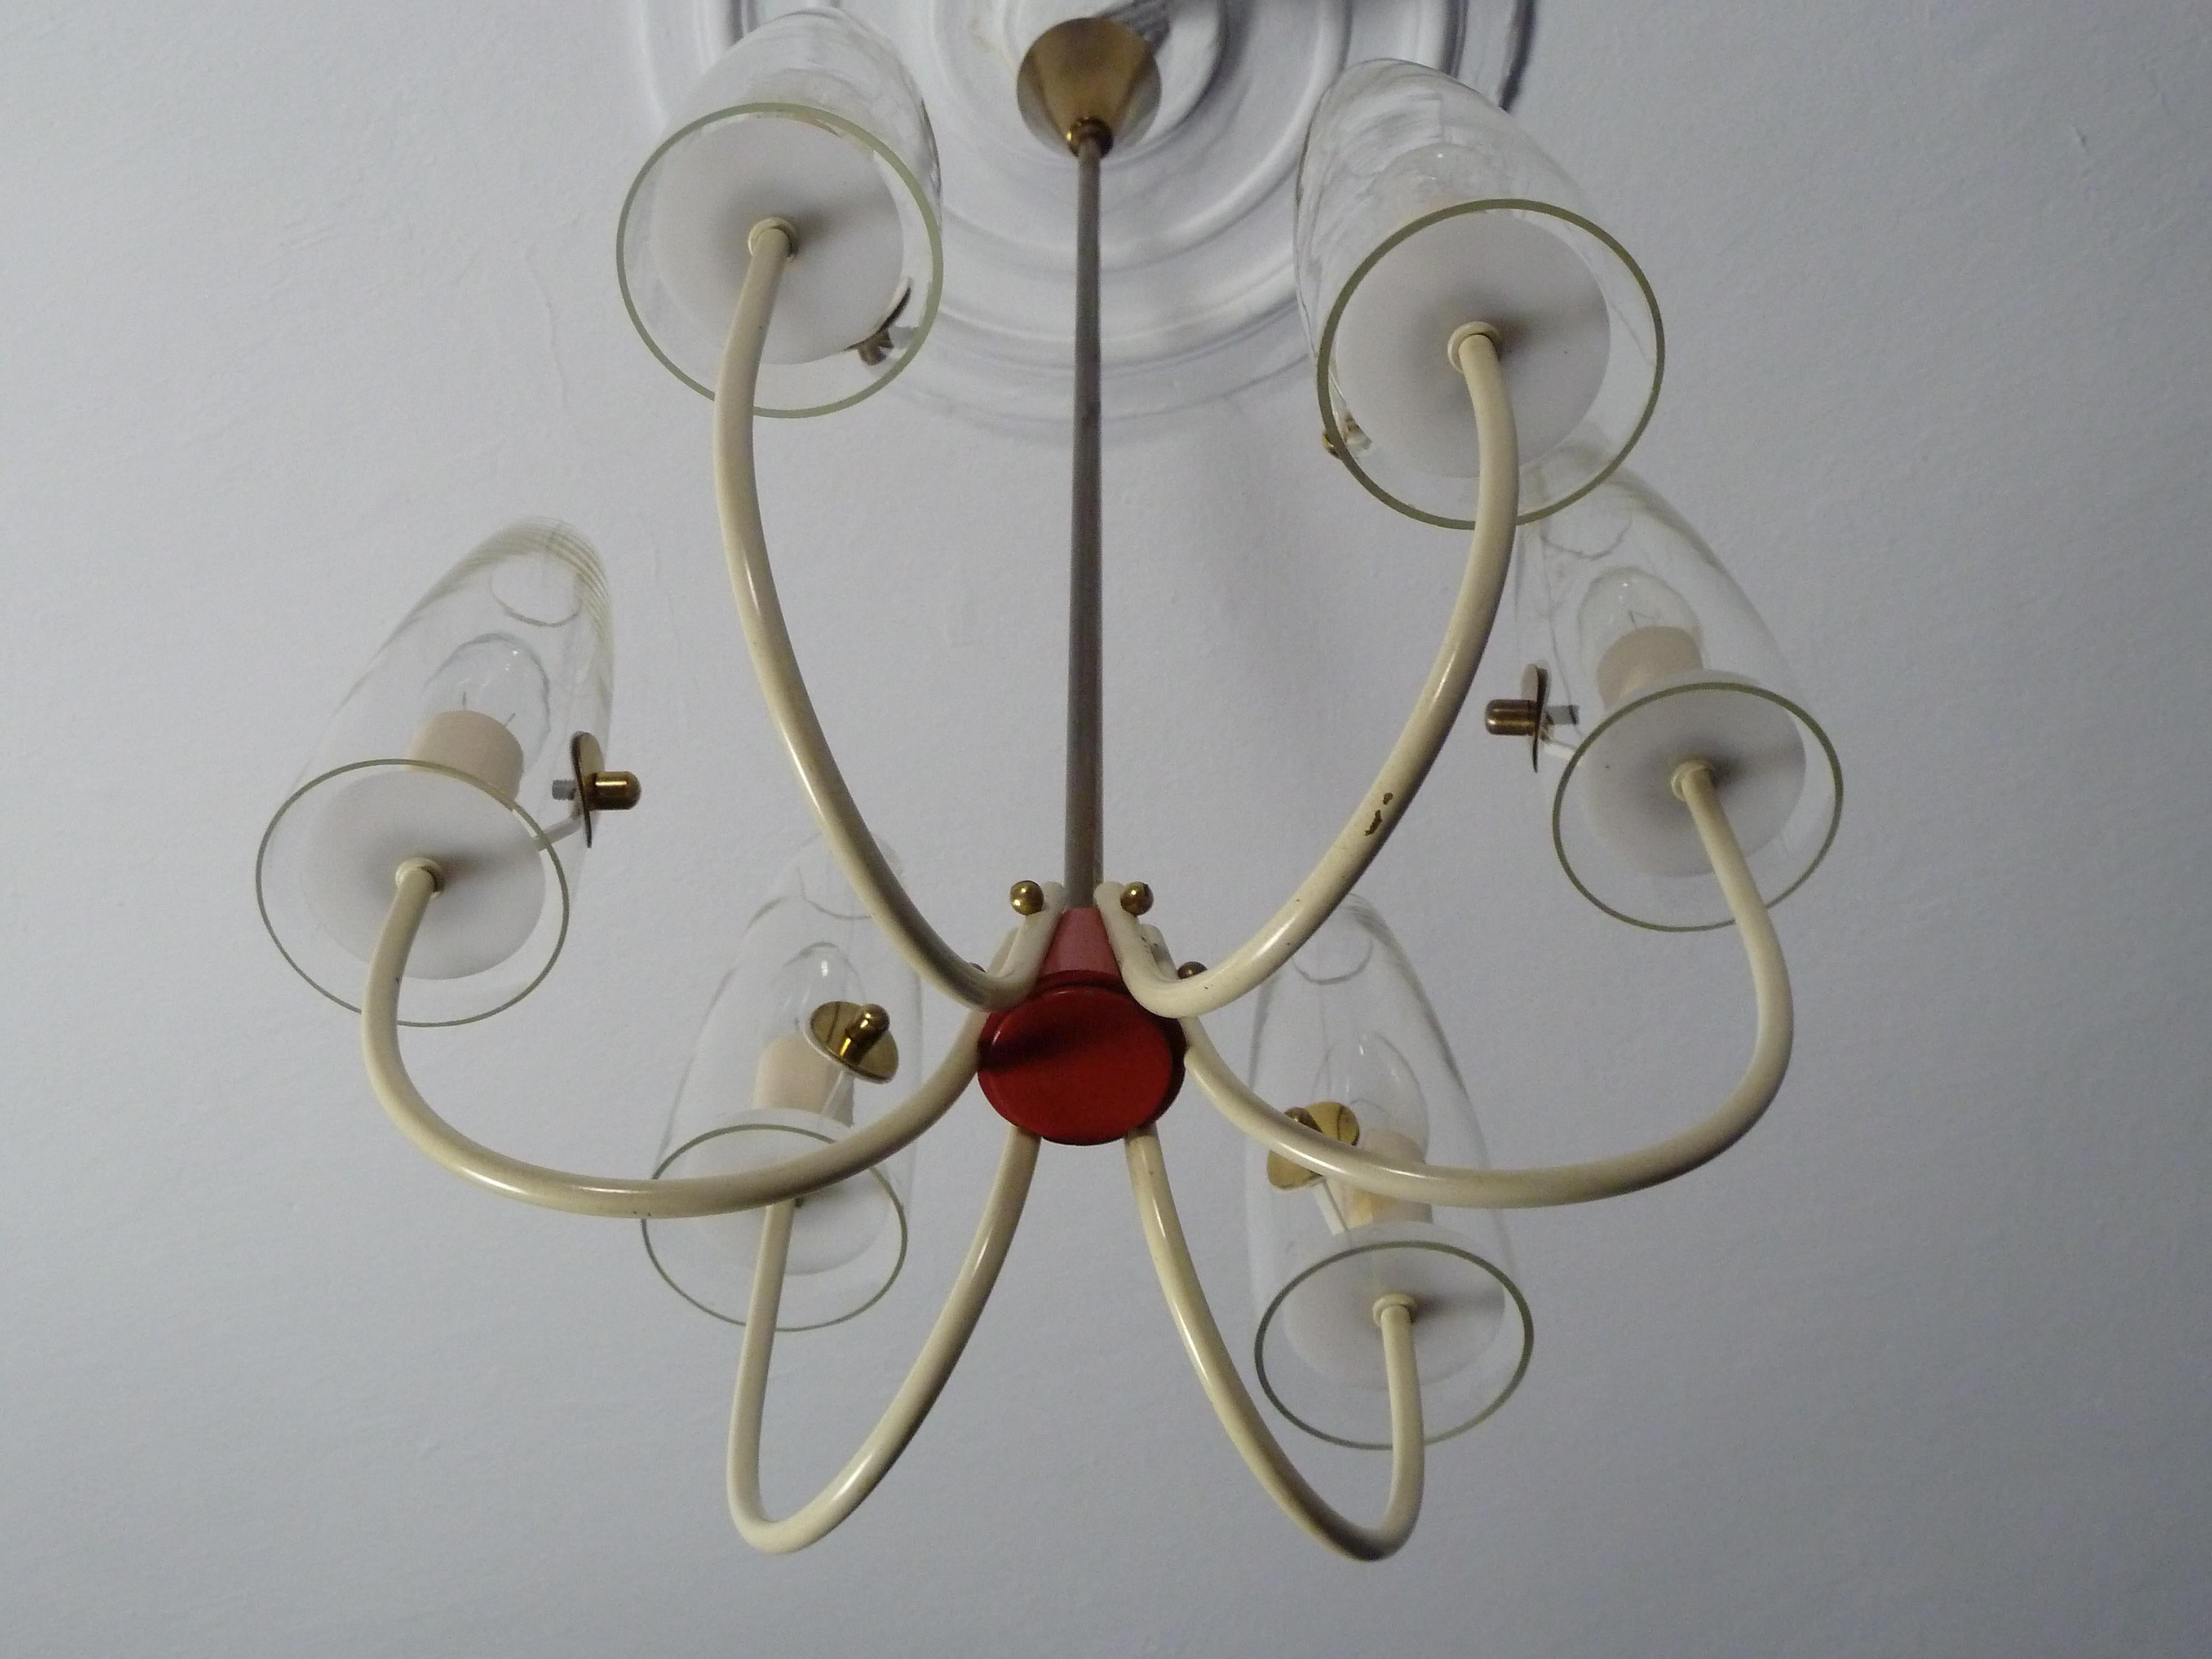 1950s Stilnovo White and Red Lacquered Midcentury Chandelier by Cosack In Good Condition For Sale In Halle, DE